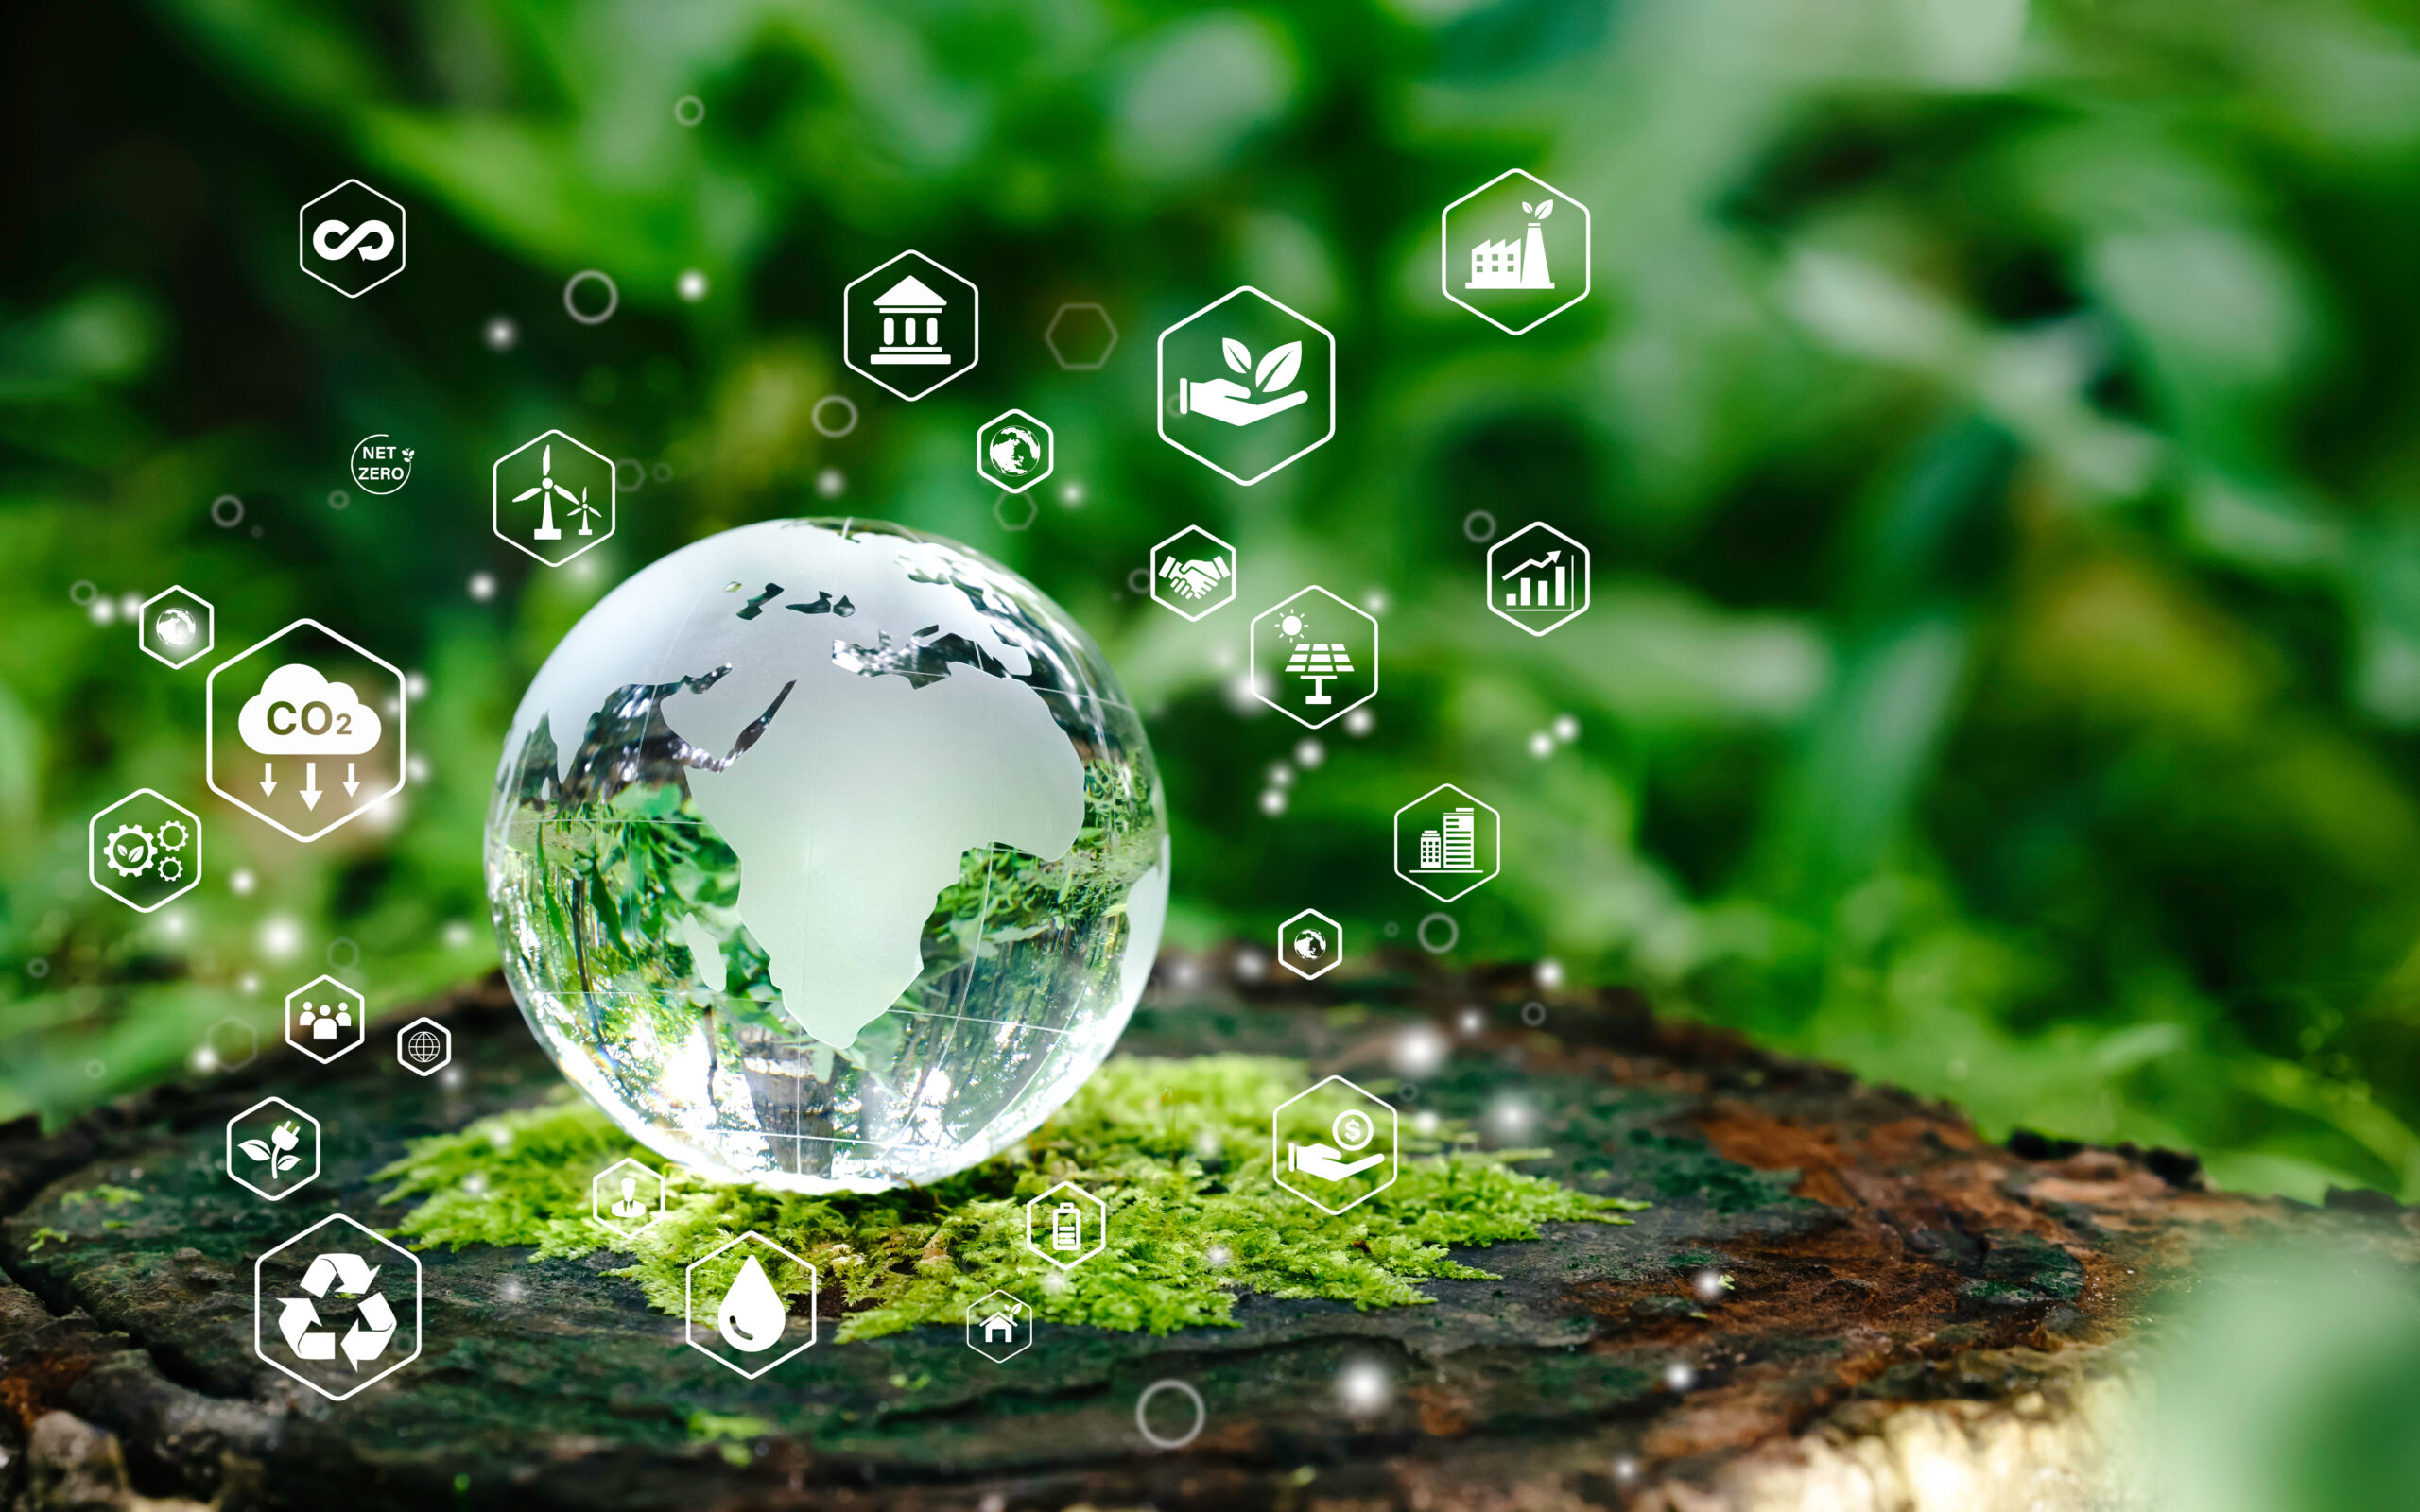 Glass globe in green forest with the icon environment of ESG, co2, circular company, and net zero